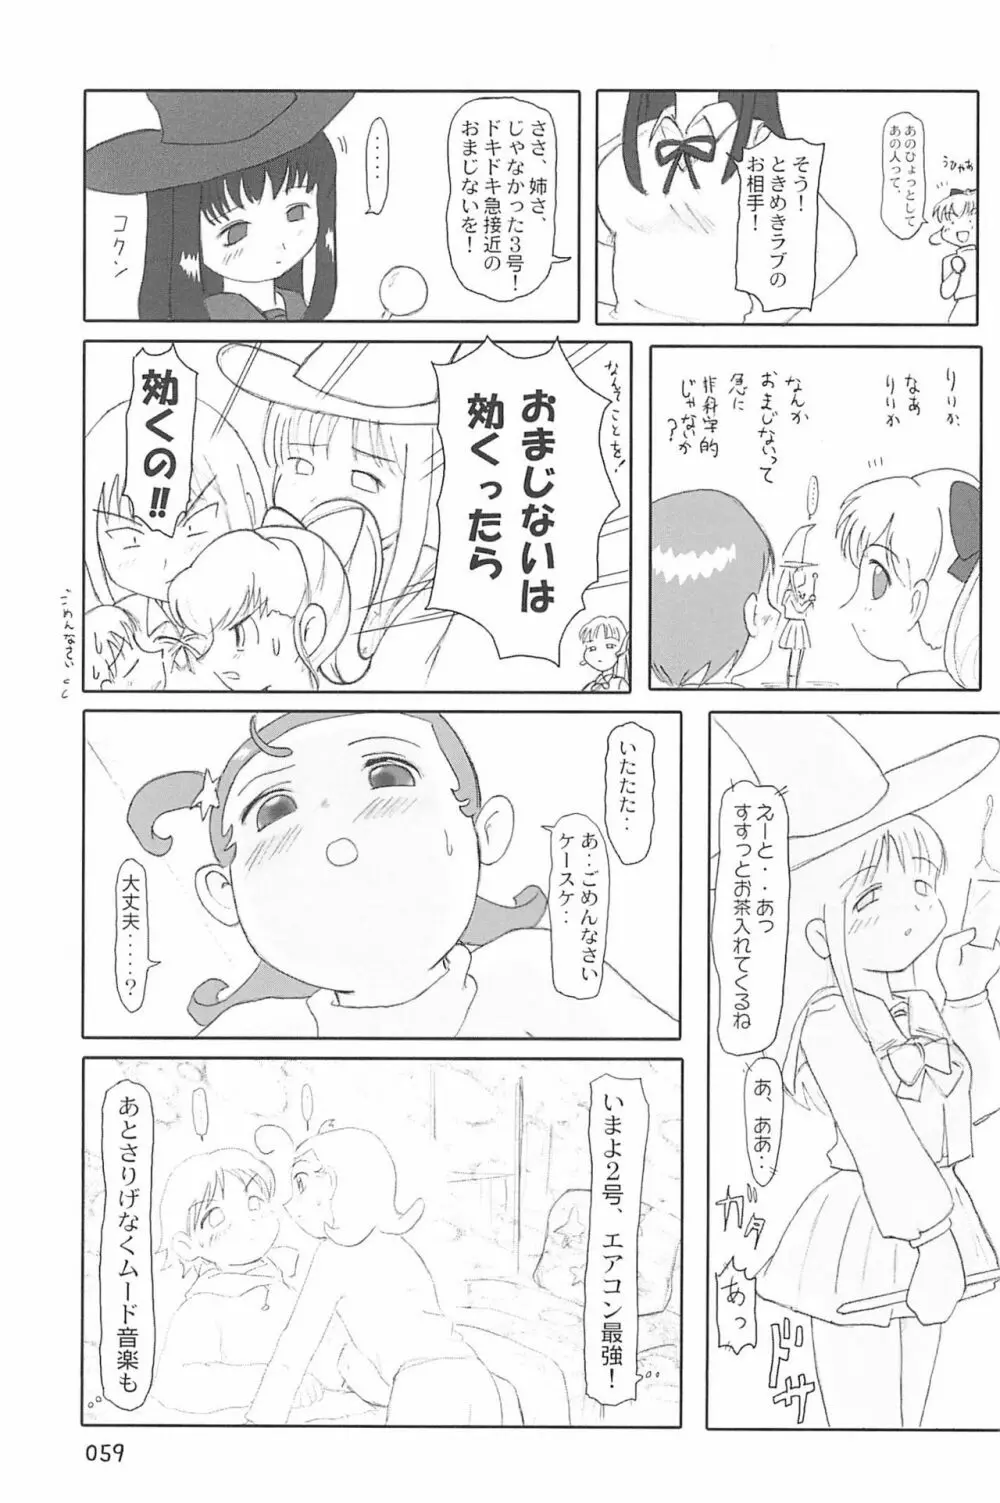 ND-special Volume 4 59ページ